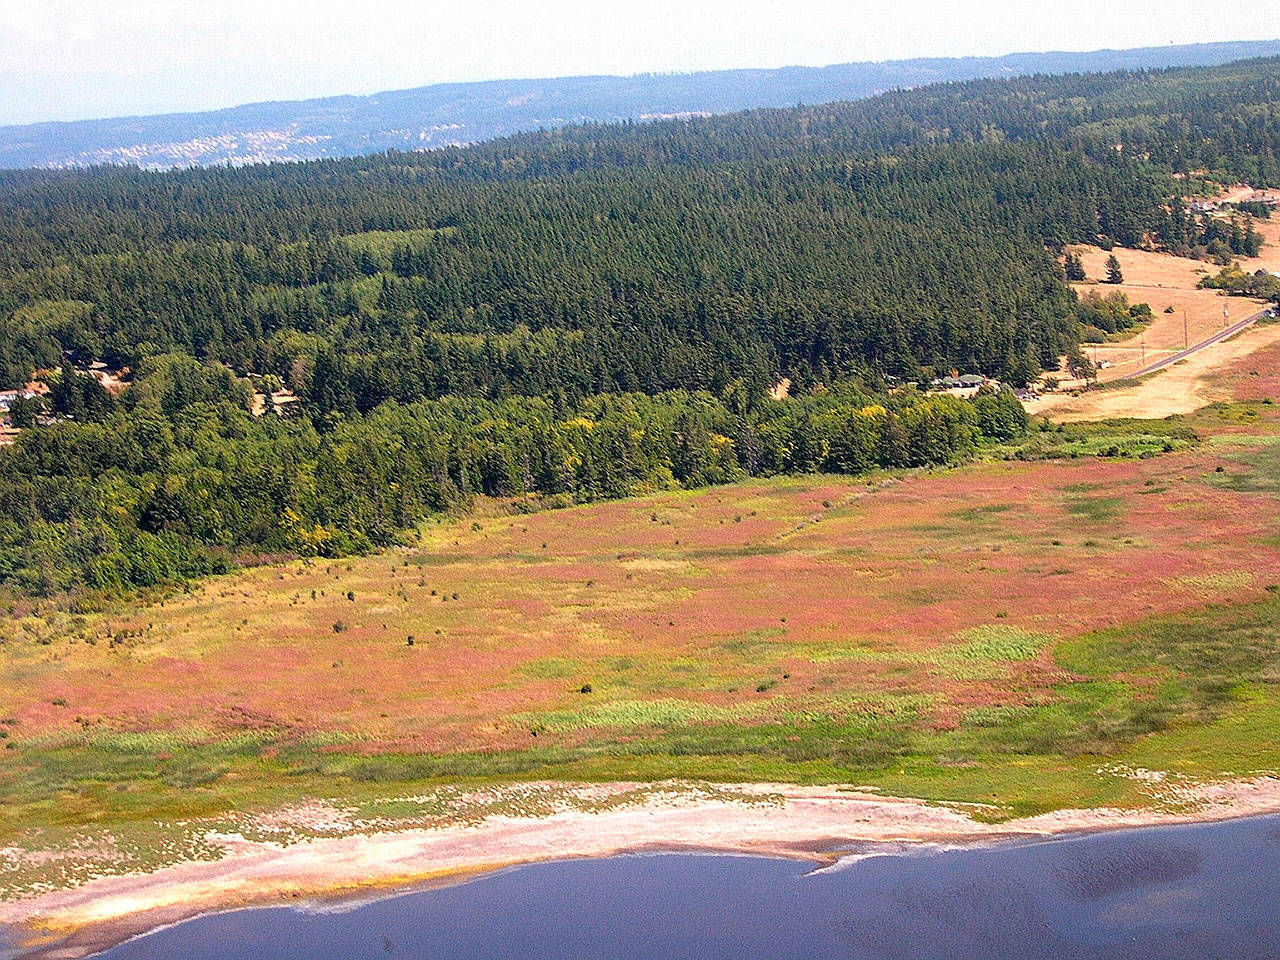 An aerial view of the eastern end of Crockett Lake reveals the pink blooms of a large stand of hairy willow-herb in 2005. More than 100 acres in the Crockett Lake Wetland Preserve are presently covered by the noxious weed, making it the largest infestation in Washington State. Photo courtesy Island County Noxious Weed Board.